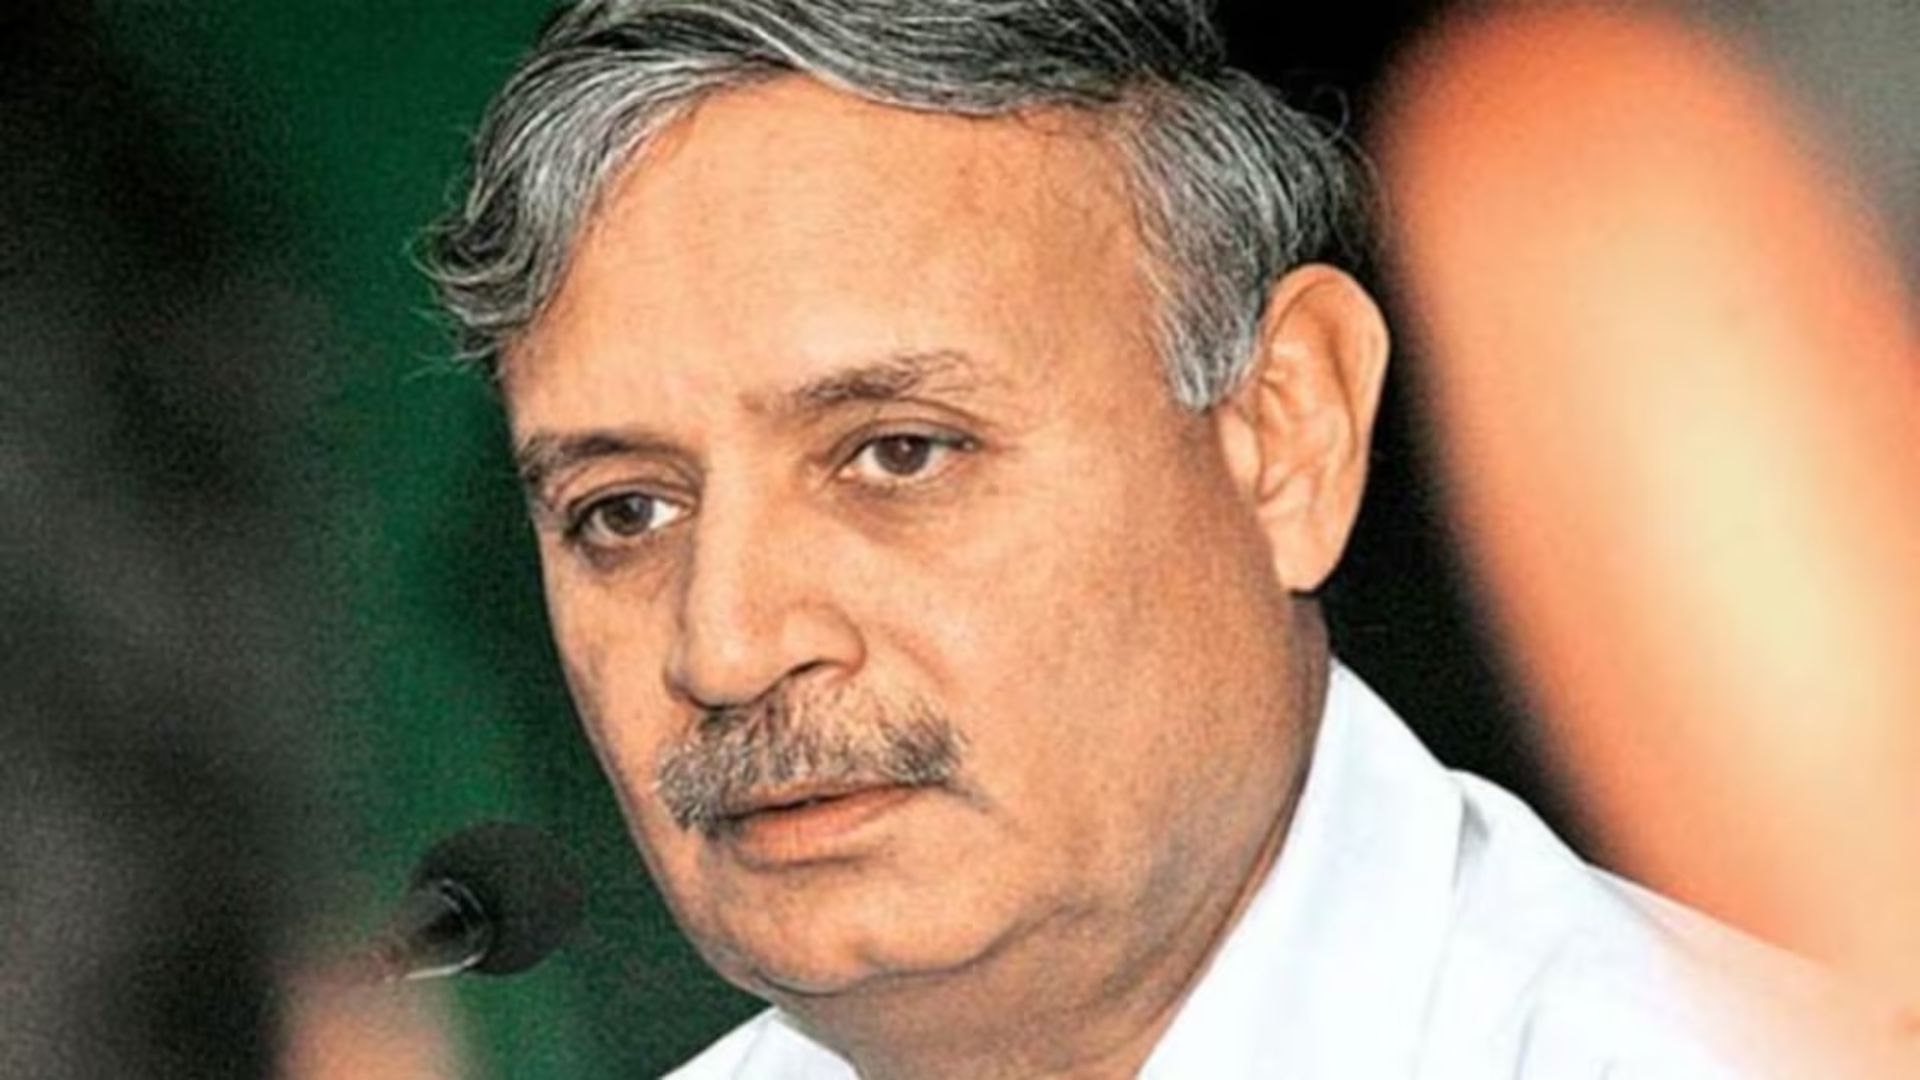 Union Minister Rao Inderjit Singh to Contest Lok Sabha Elections in Haryana, Denies Rumors of Assembly Candidacy